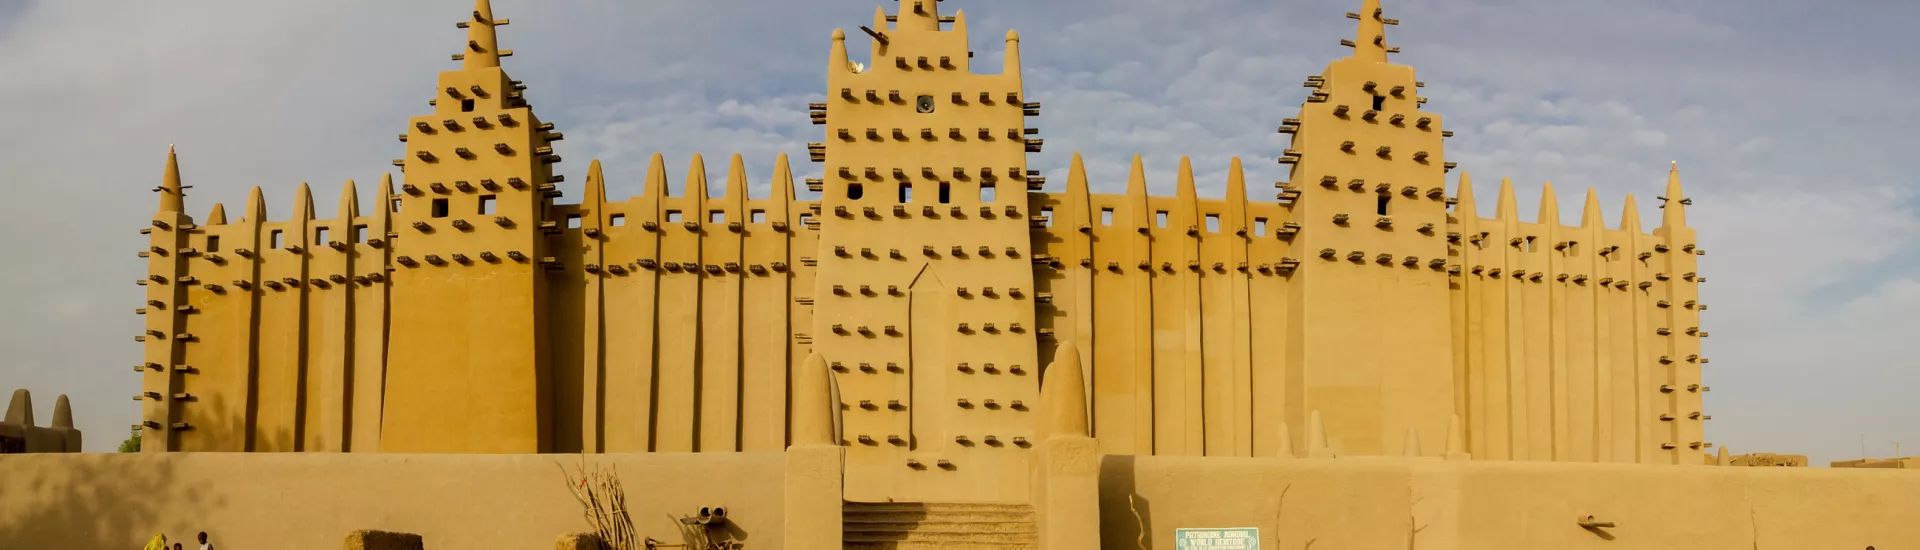 Panoramic view of a mosque in Djenné, Mali